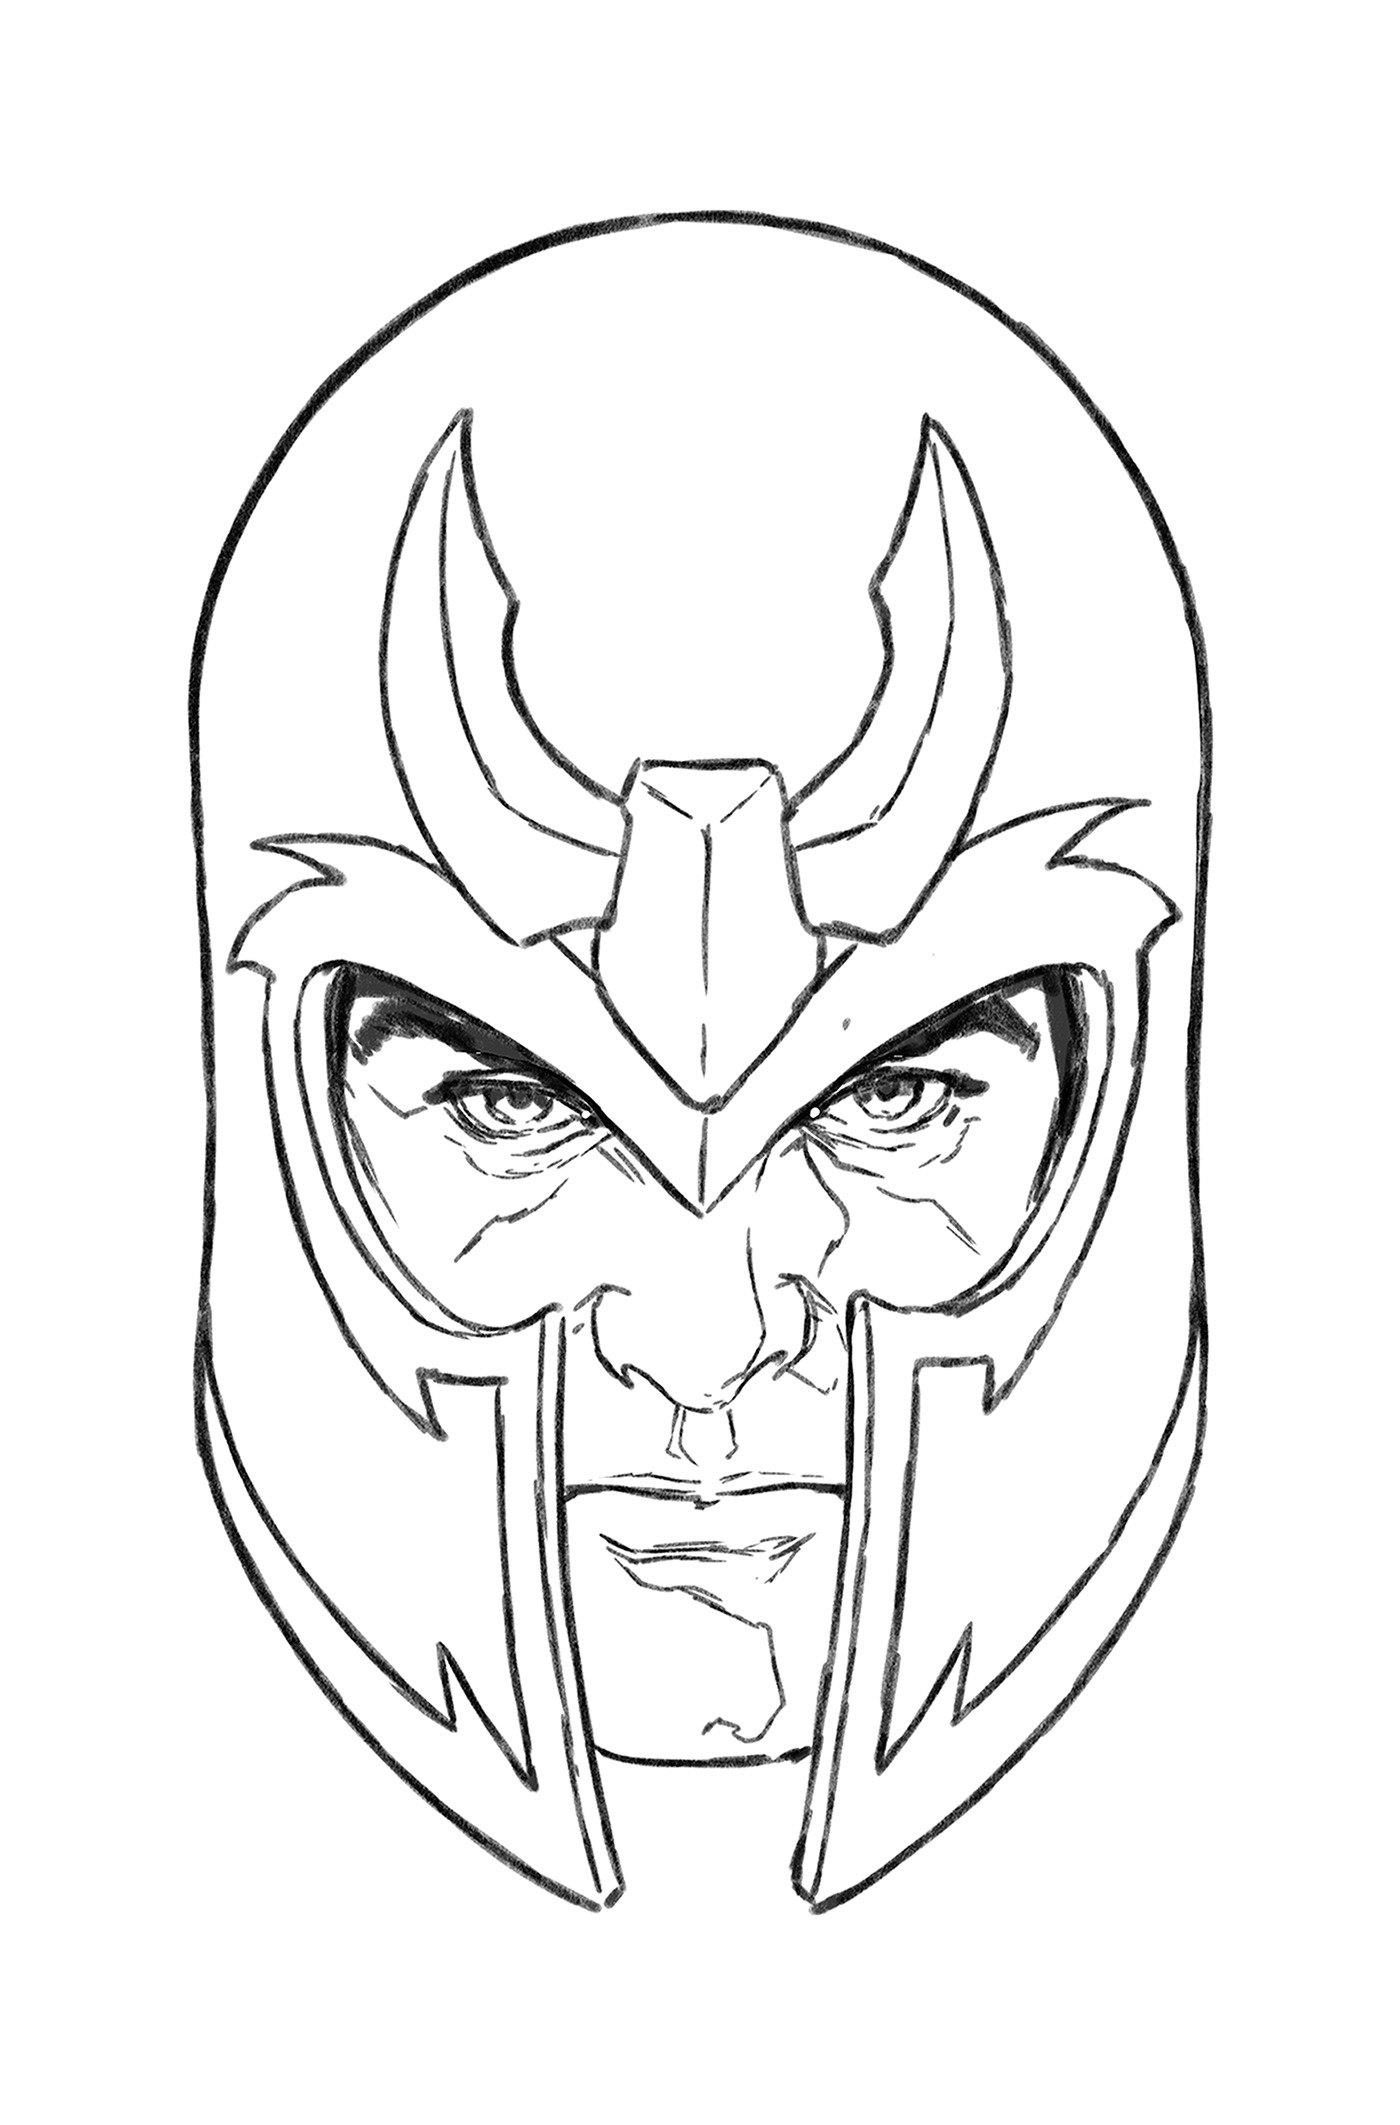 Resurrection of Magneto #3 Mark Brooks Headshot Virgin Sketch Variant (Fall of the House of X) 1 for 50 Incentive